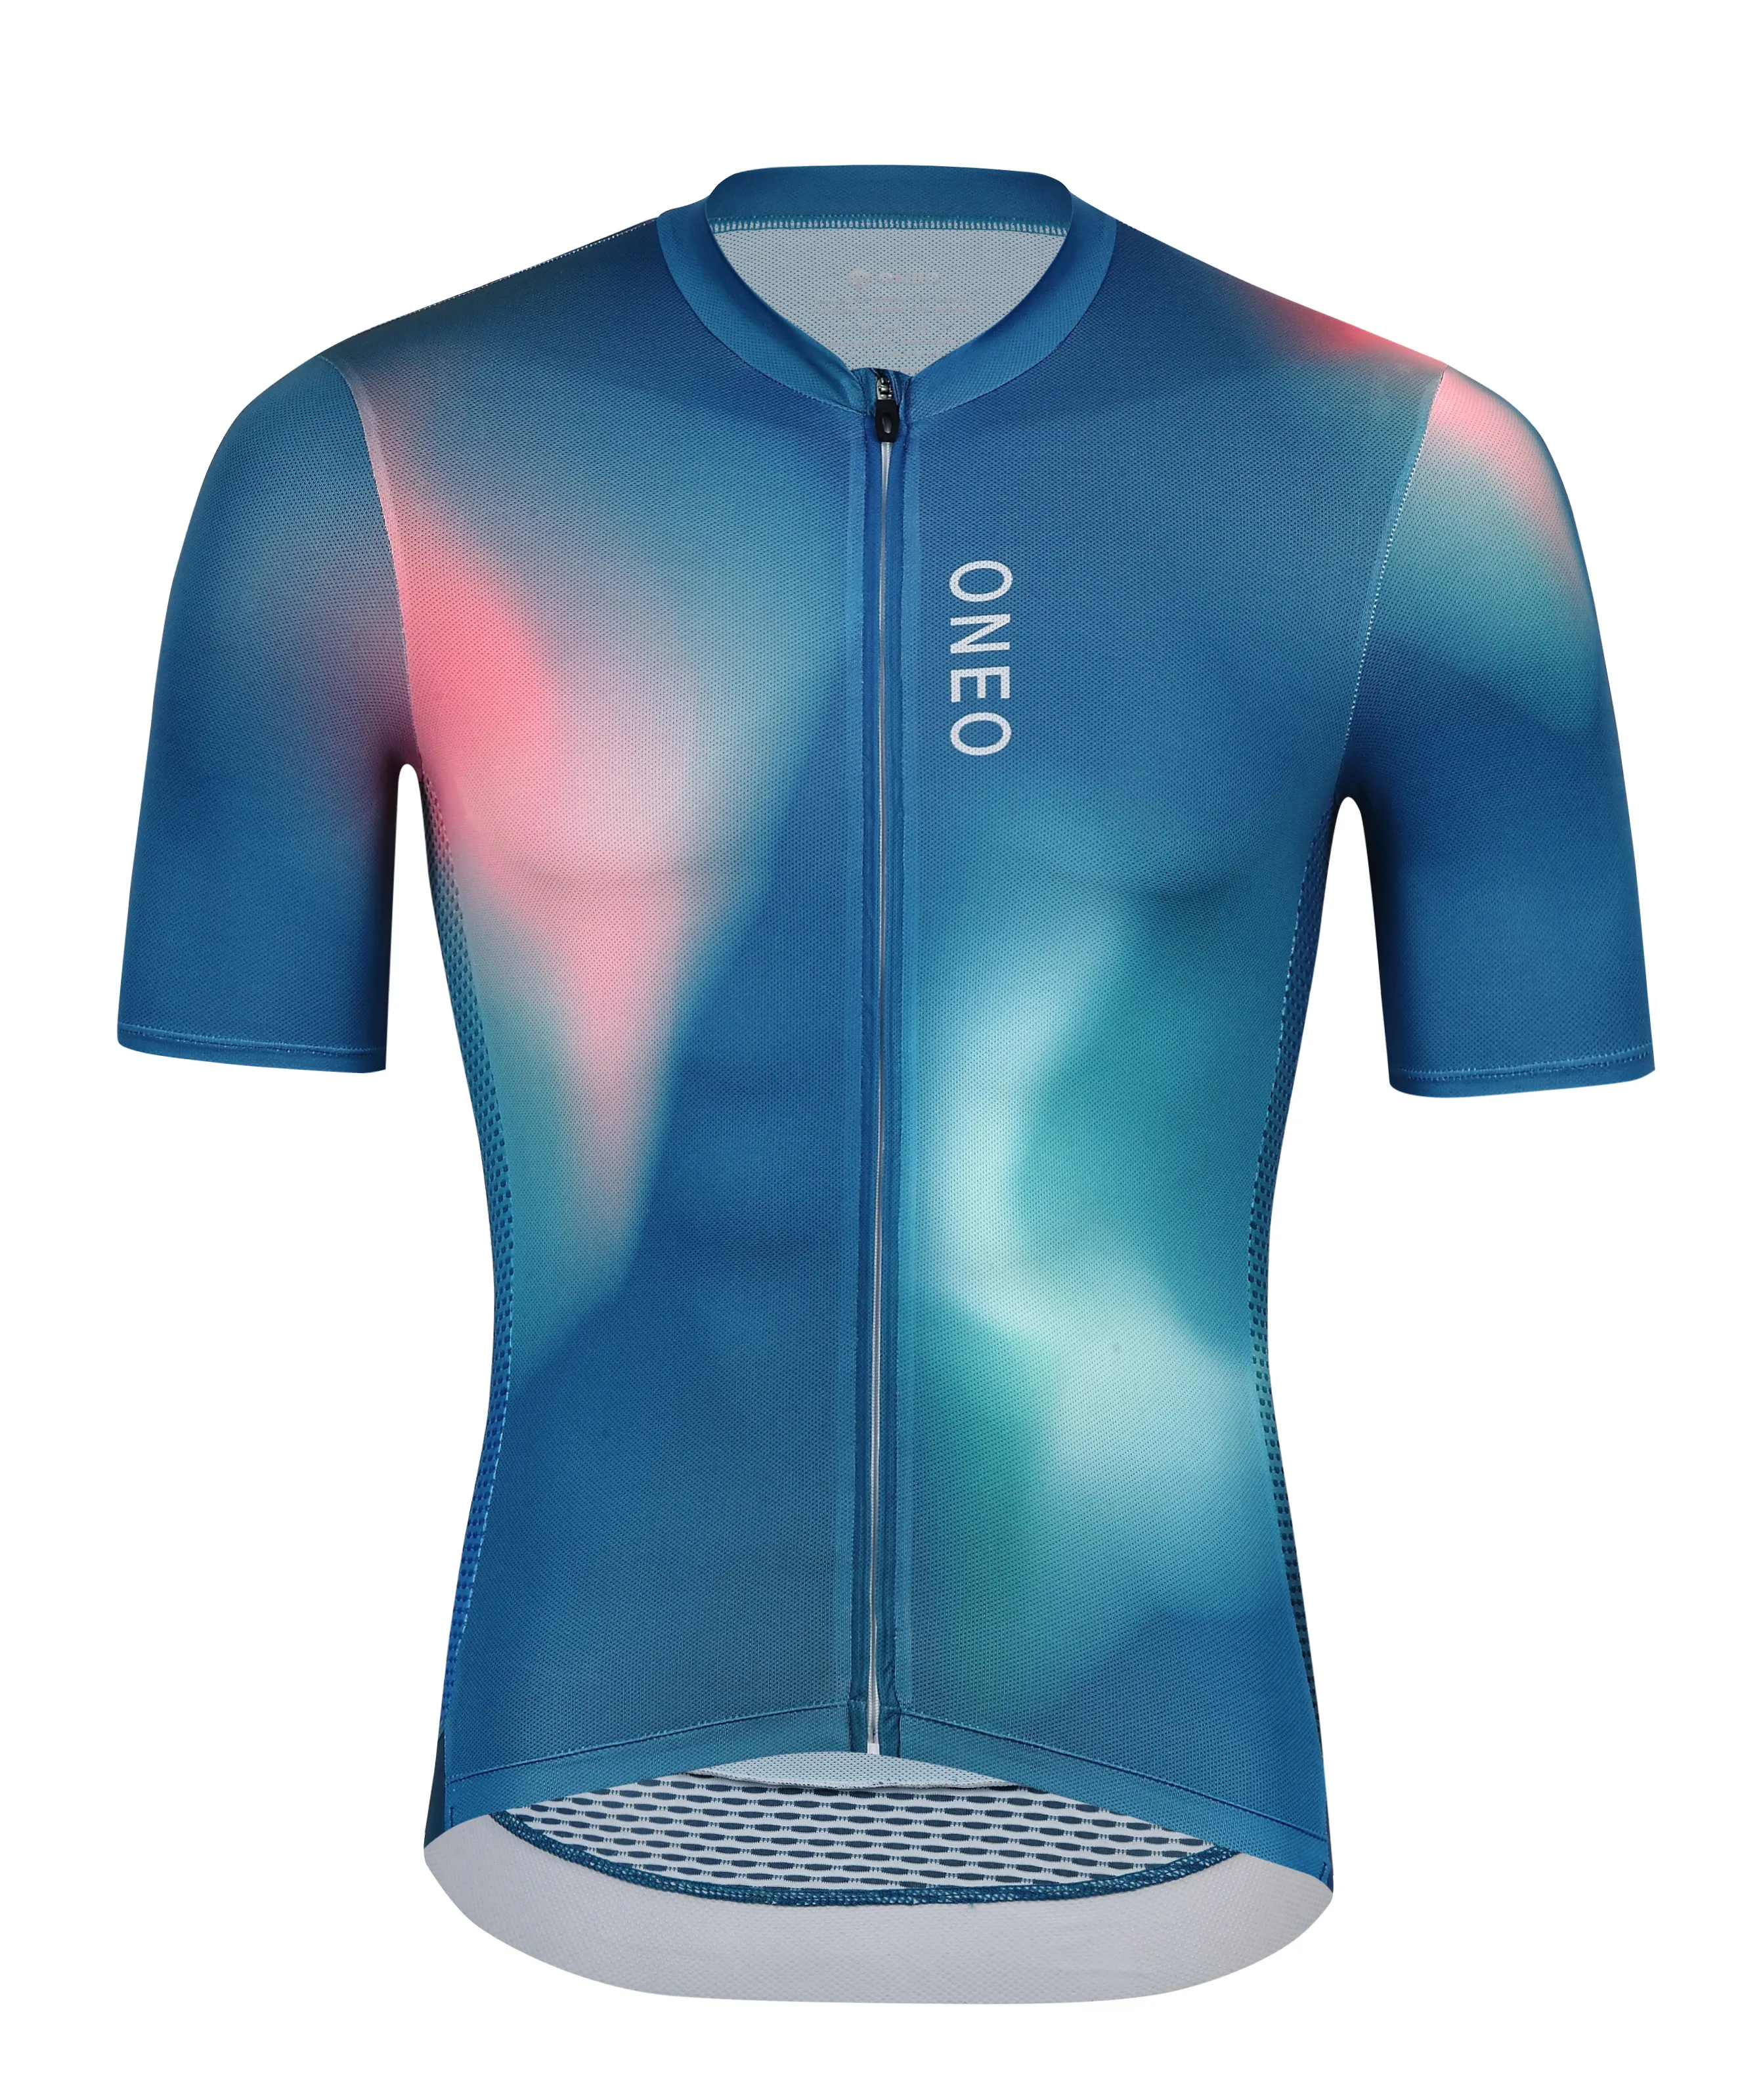 ONEO Custom Sublimation Bicycle Wear Pro Team Short Sleeves Cycling Jersey for Men